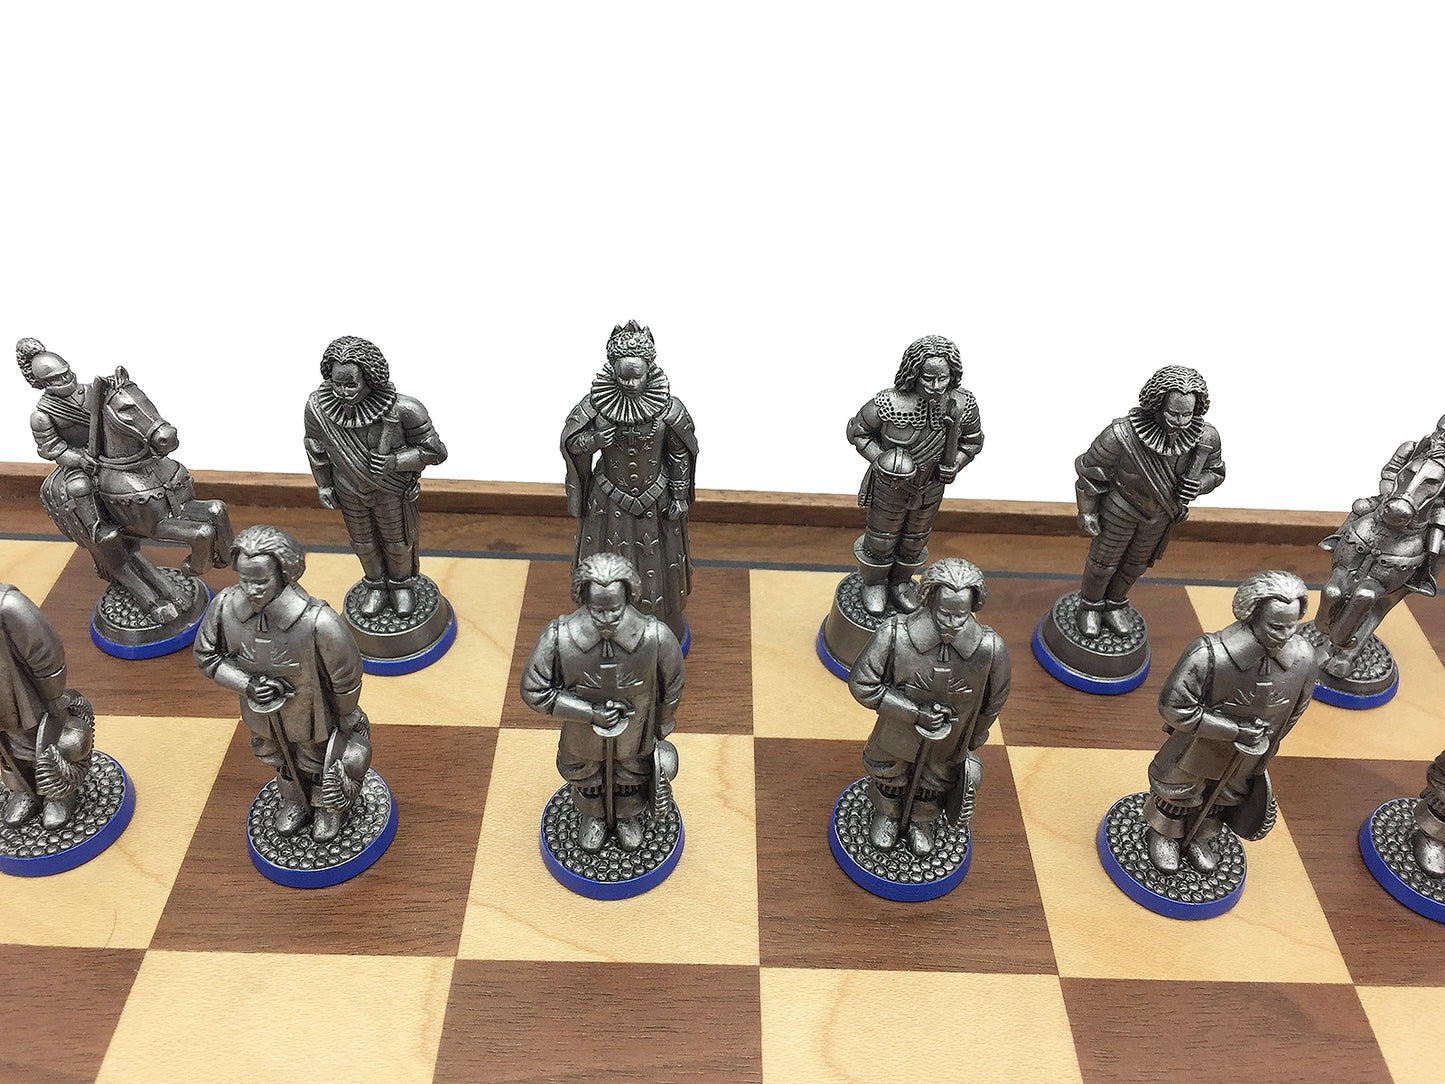 Toy soldier miniature army men The Three Musketeers Chess Set. Queen.